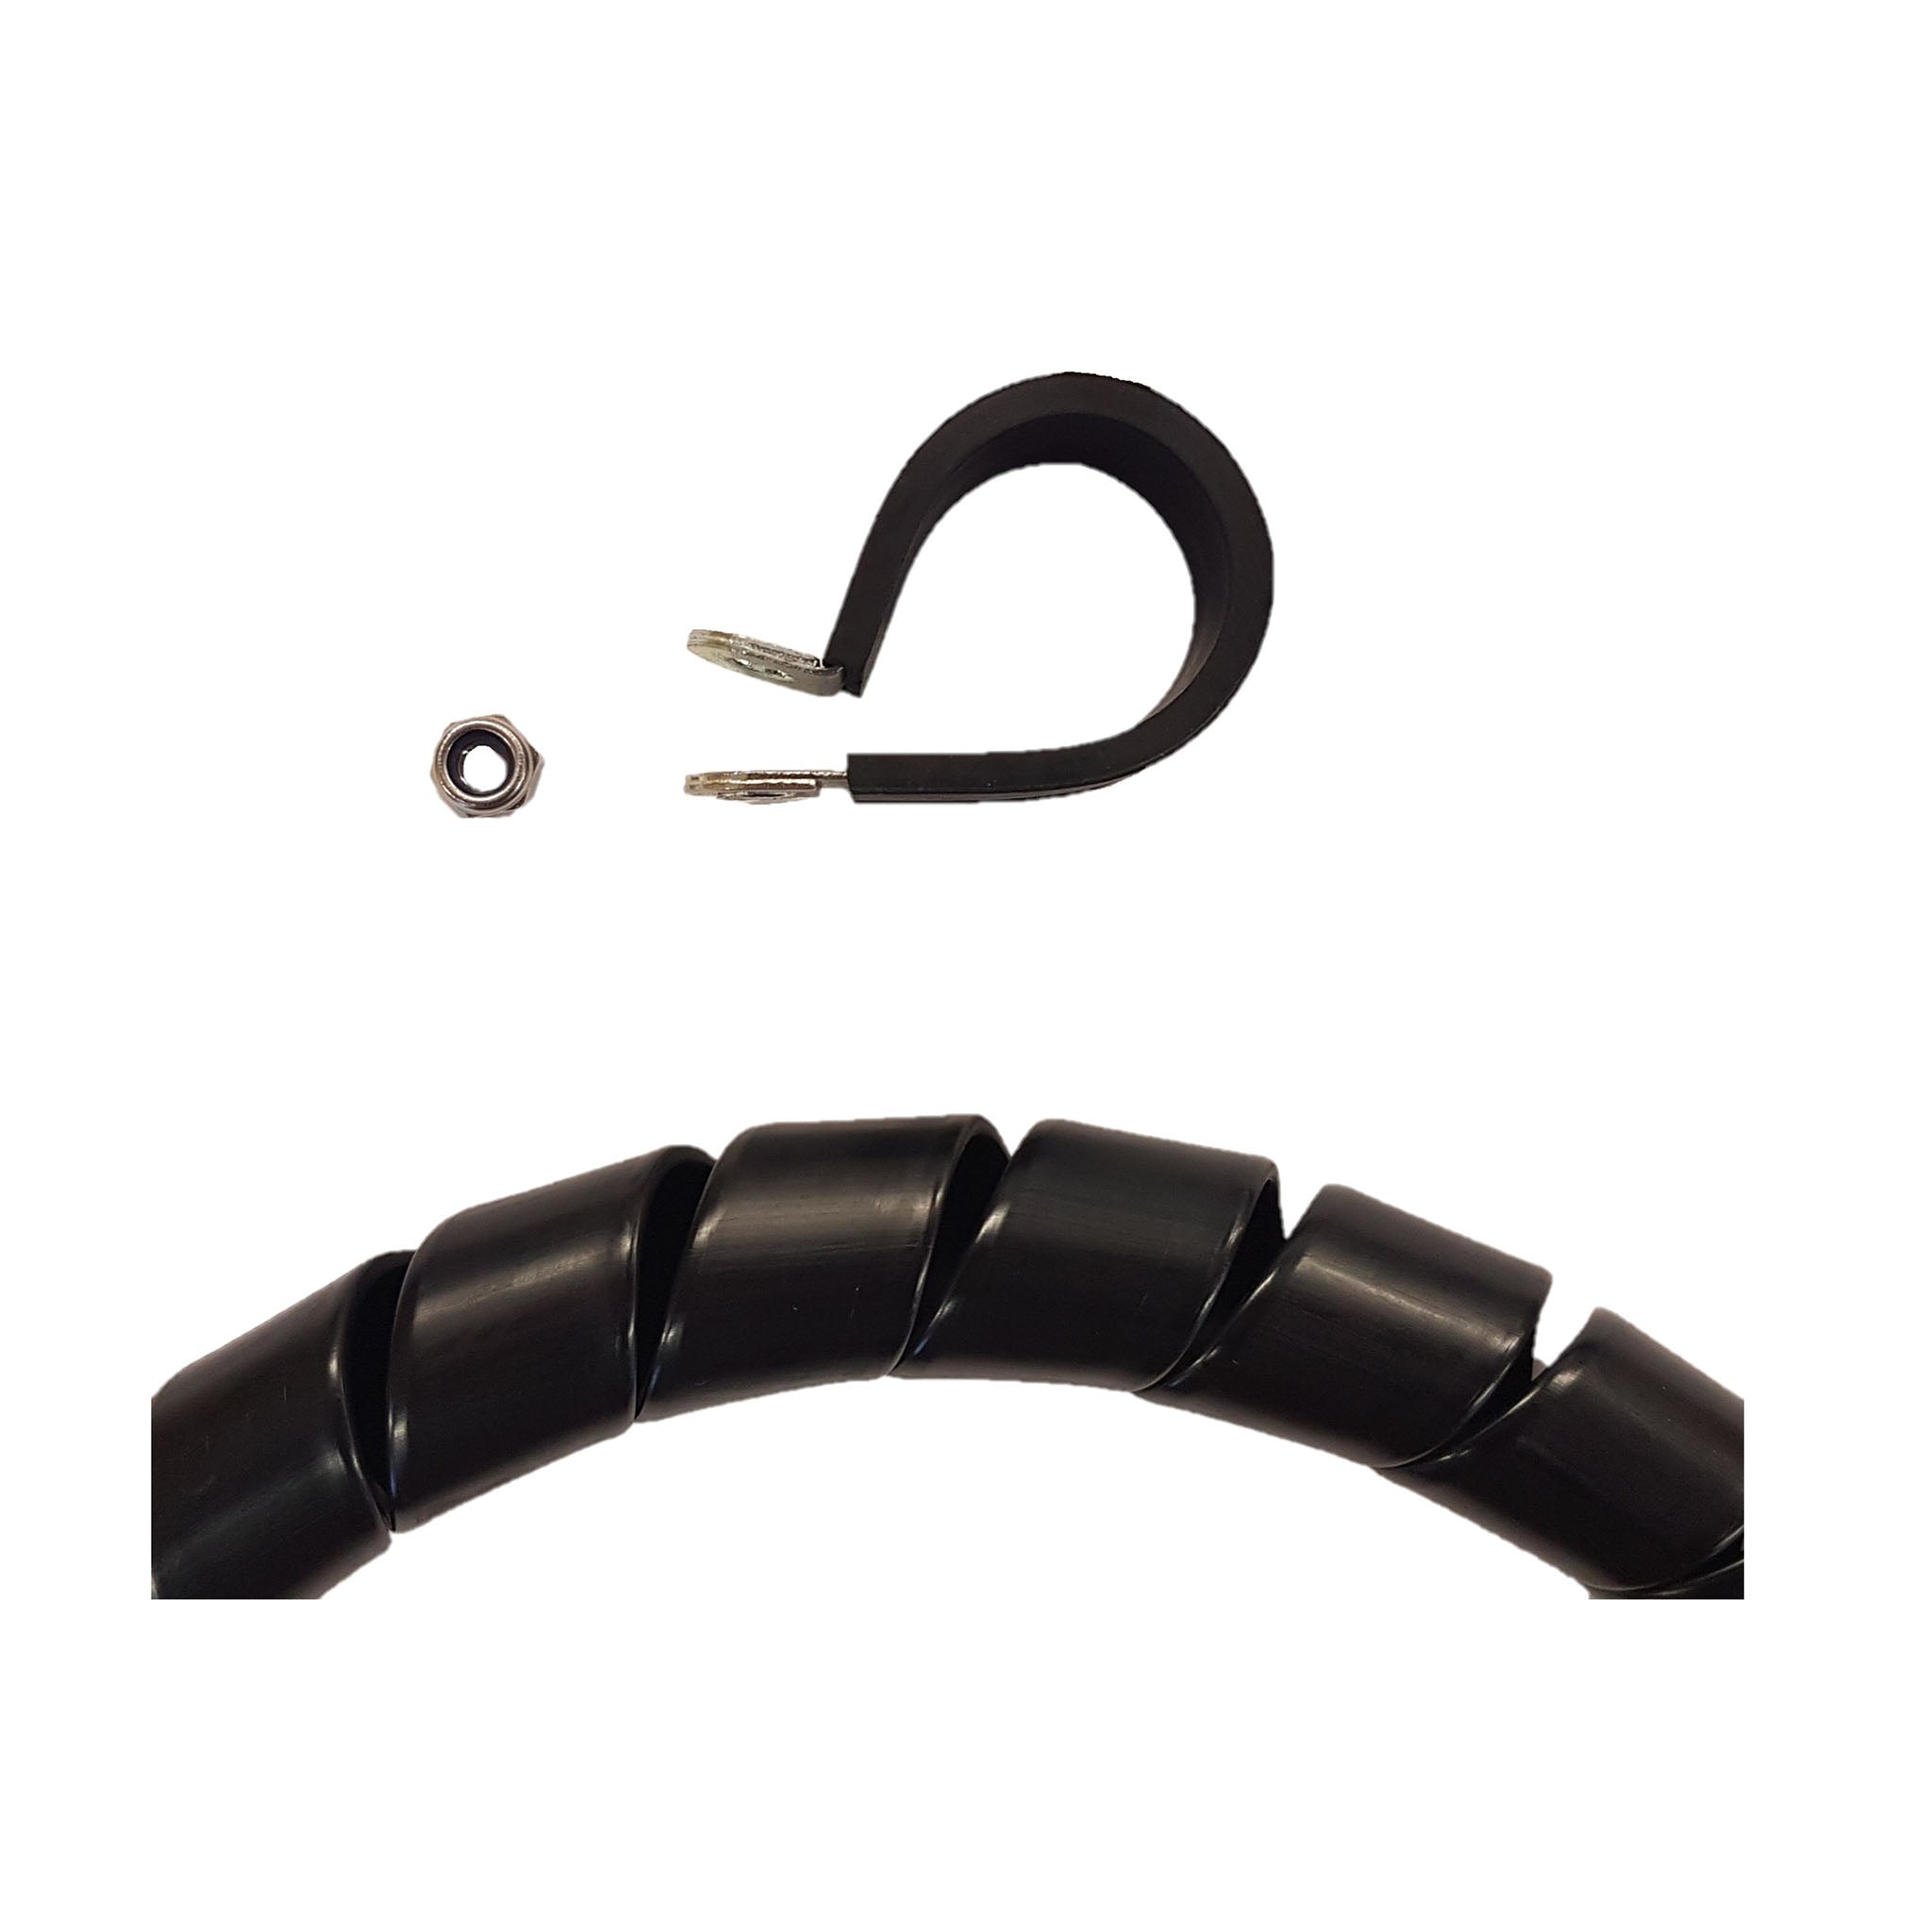 Feed Hose Protection Kit for 3/8